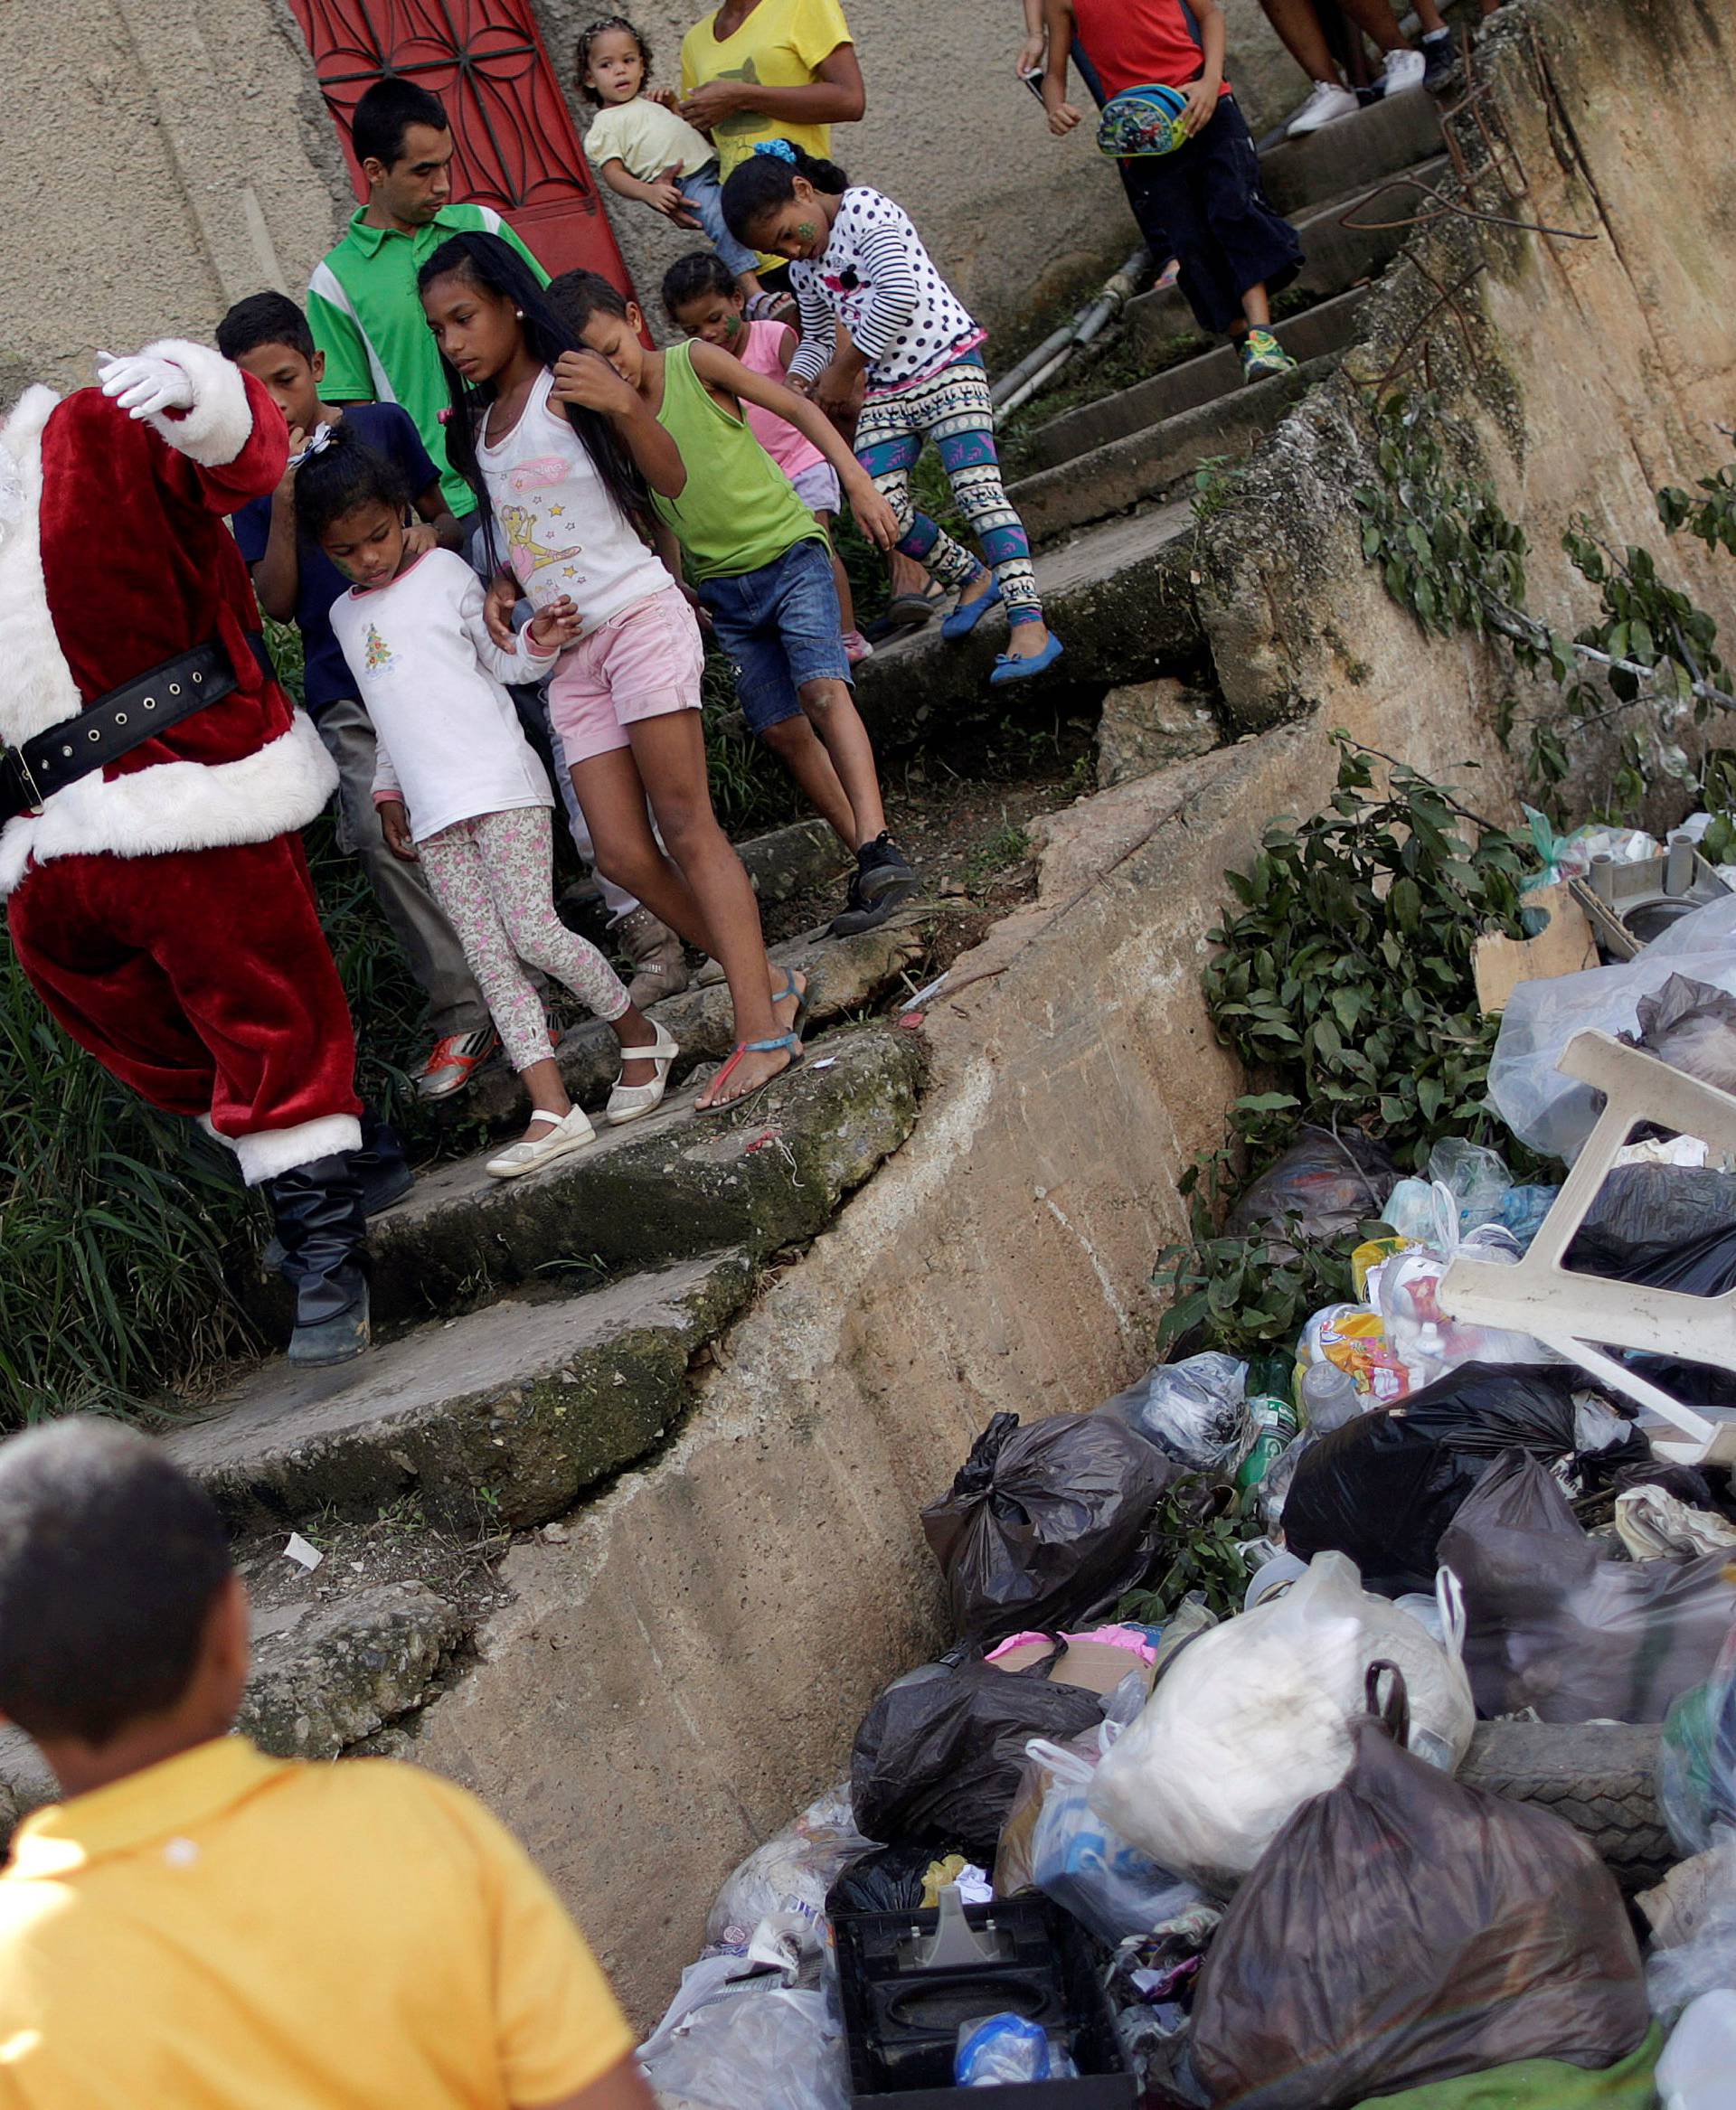 Santa Claus greets a child during a visit to residents of the slum of Petare in Caracas